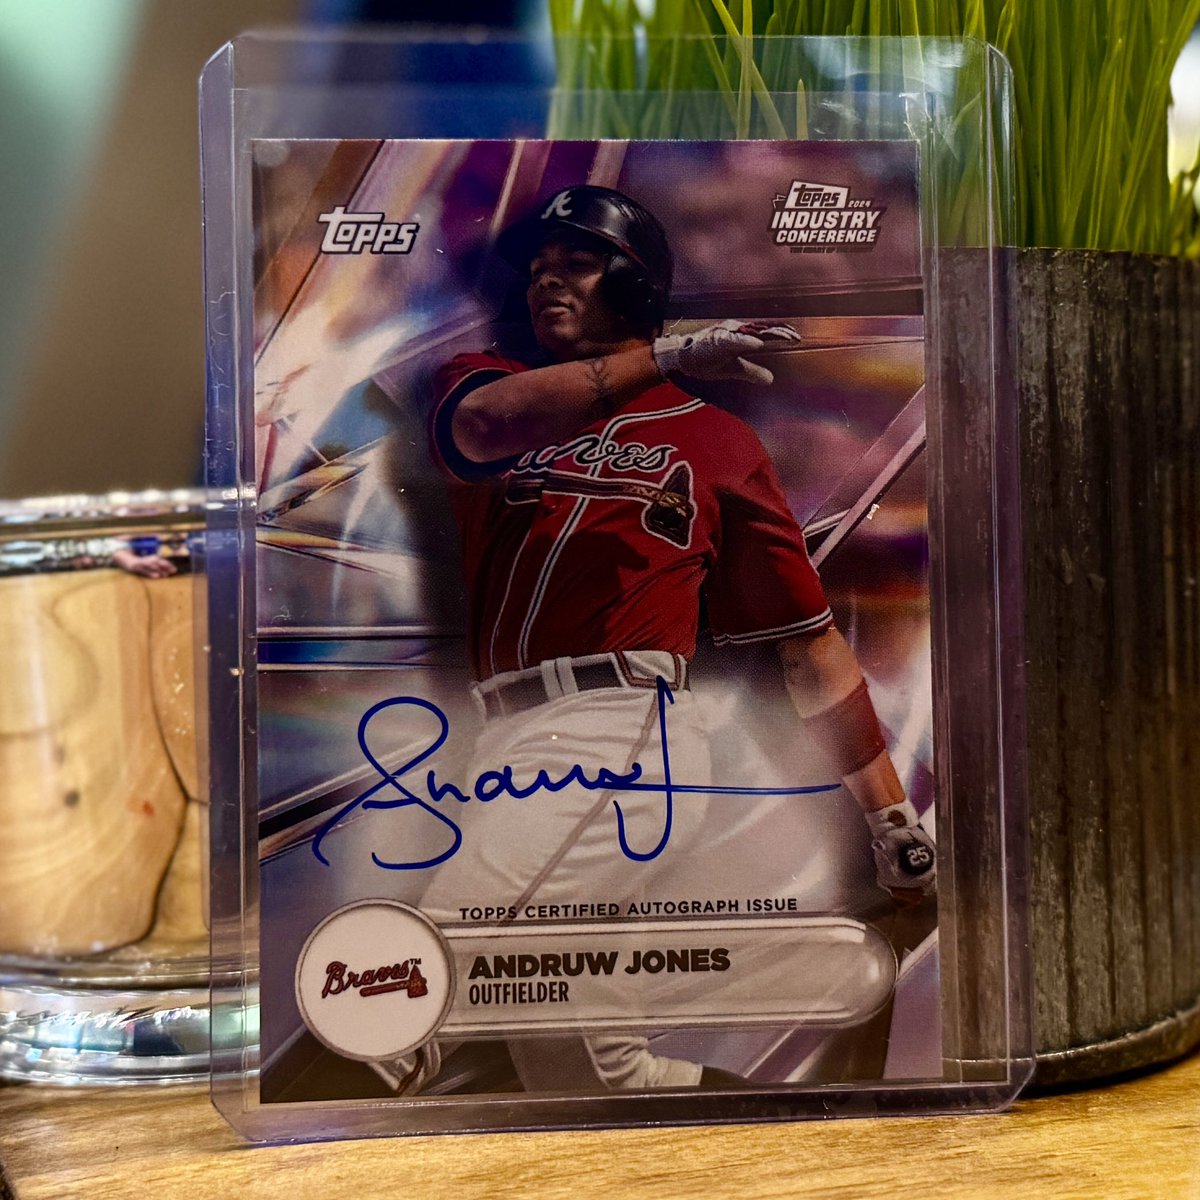 Ready for another GIVEAWAY?! ⚾️

RETWEET & FOLLOW for your chance to win this Andruw Jones autographed 2024 Topps Industry Conference trading card!

#Topps #TheHobby